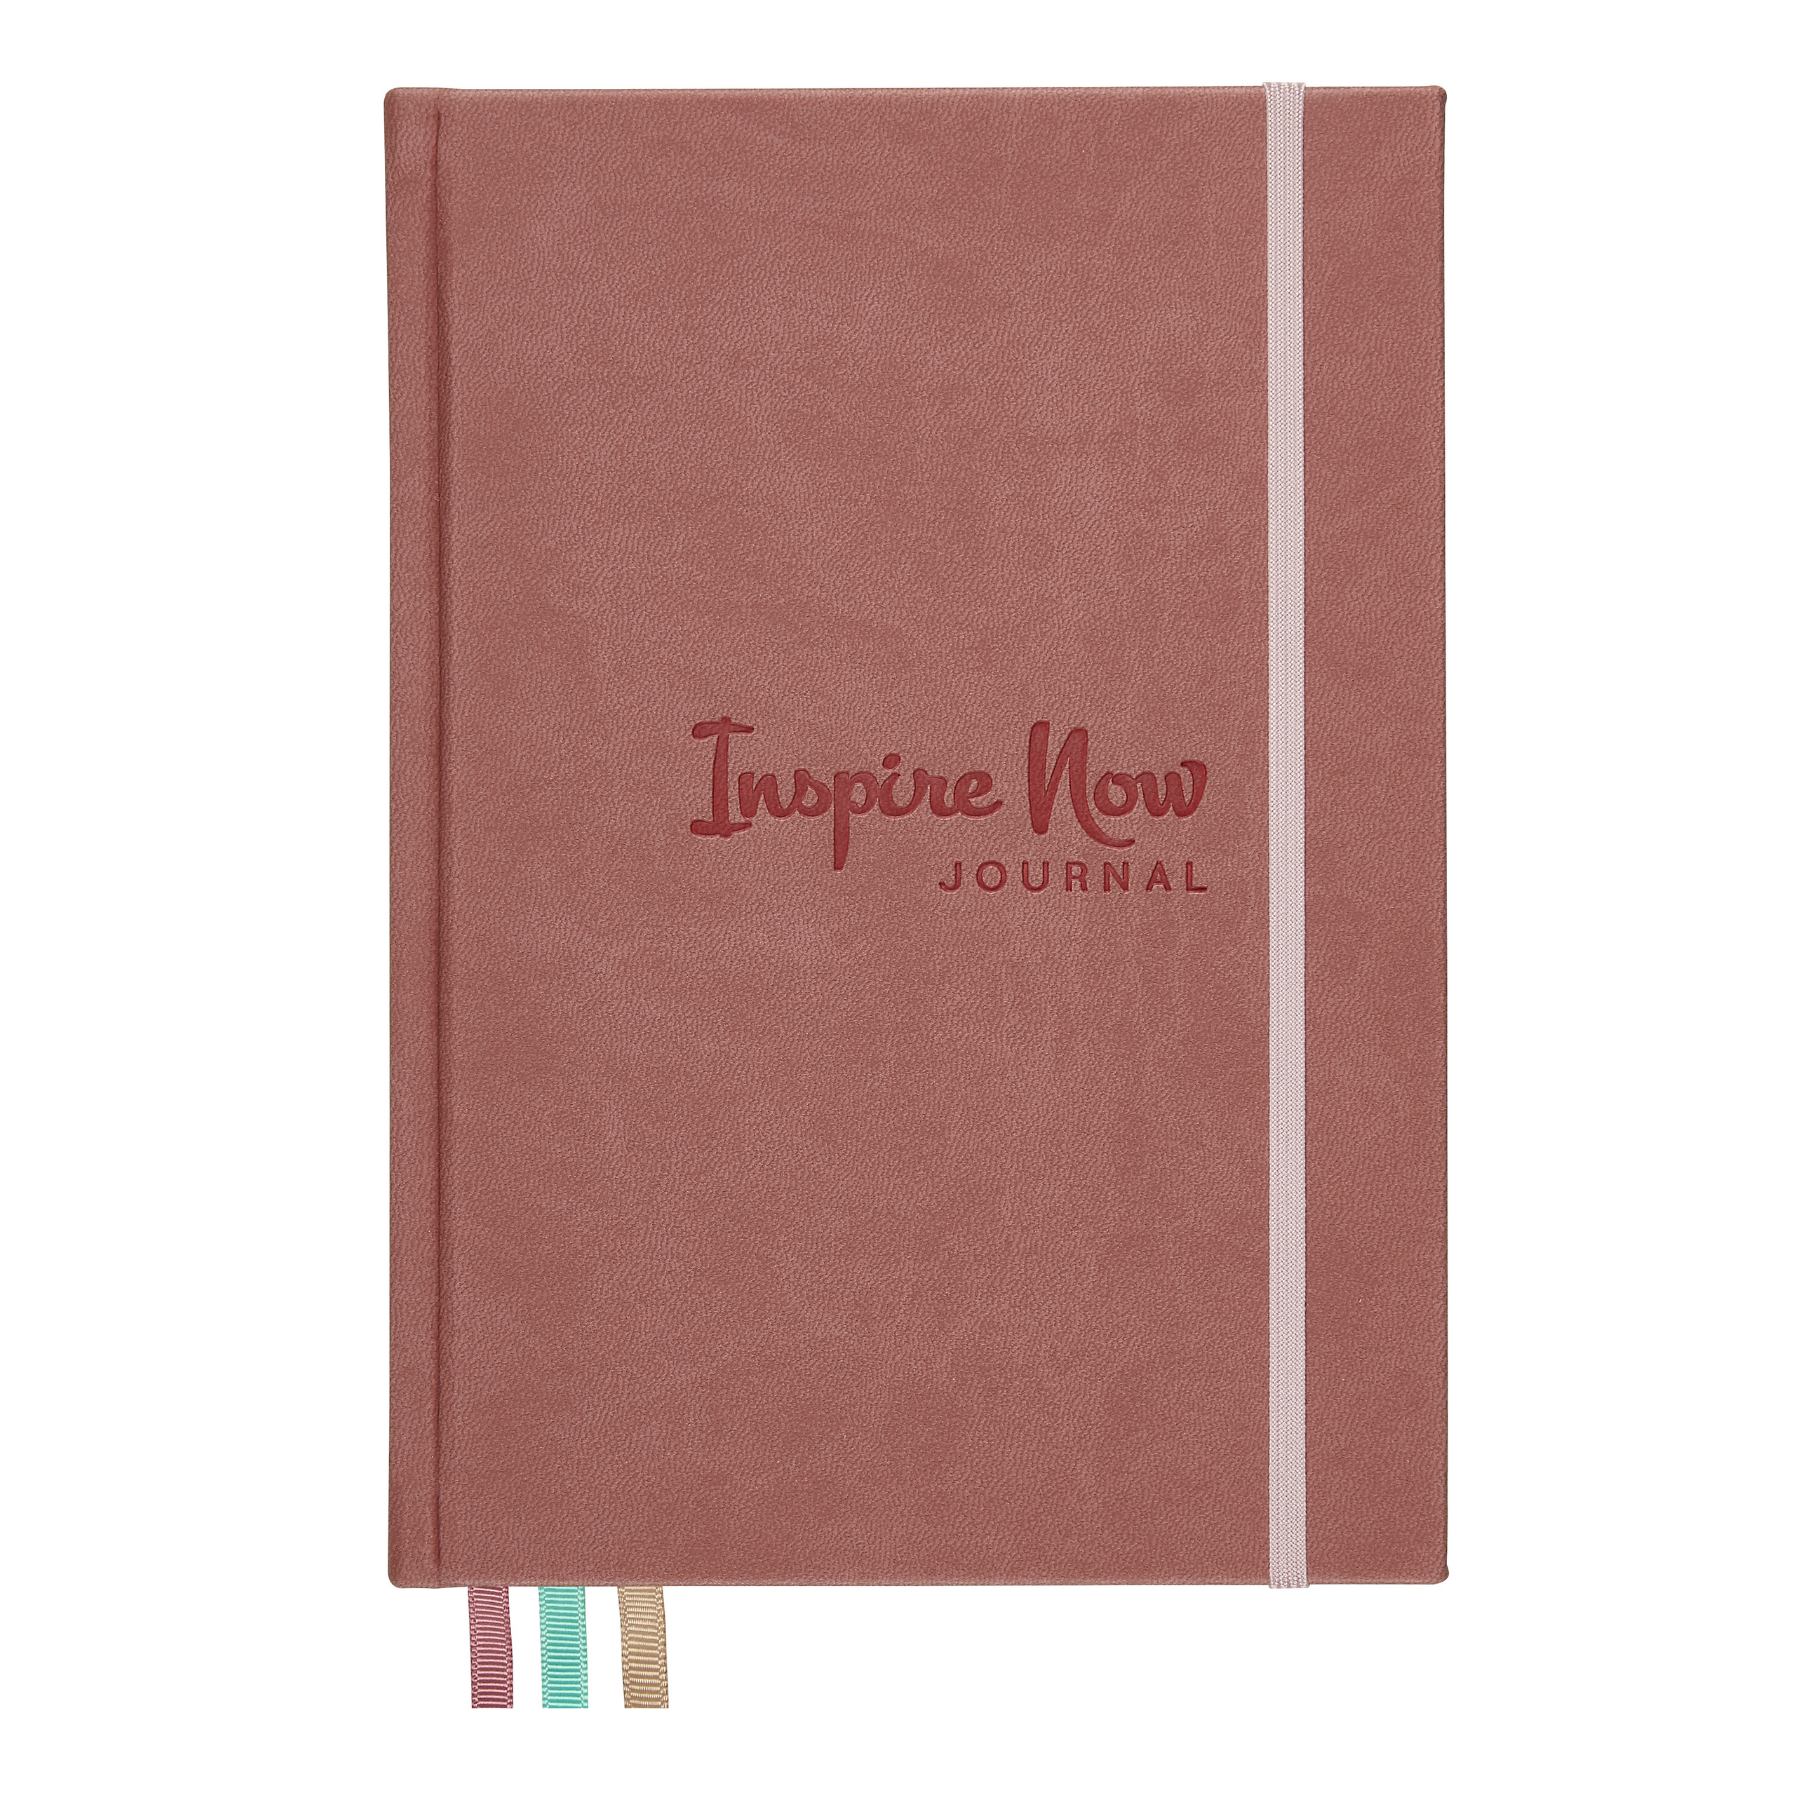 Inspire Now Journal - Productivity Planner - Organiser - Get things done - Journal - Goal Setting - A5 Hardcover - Vegan PU